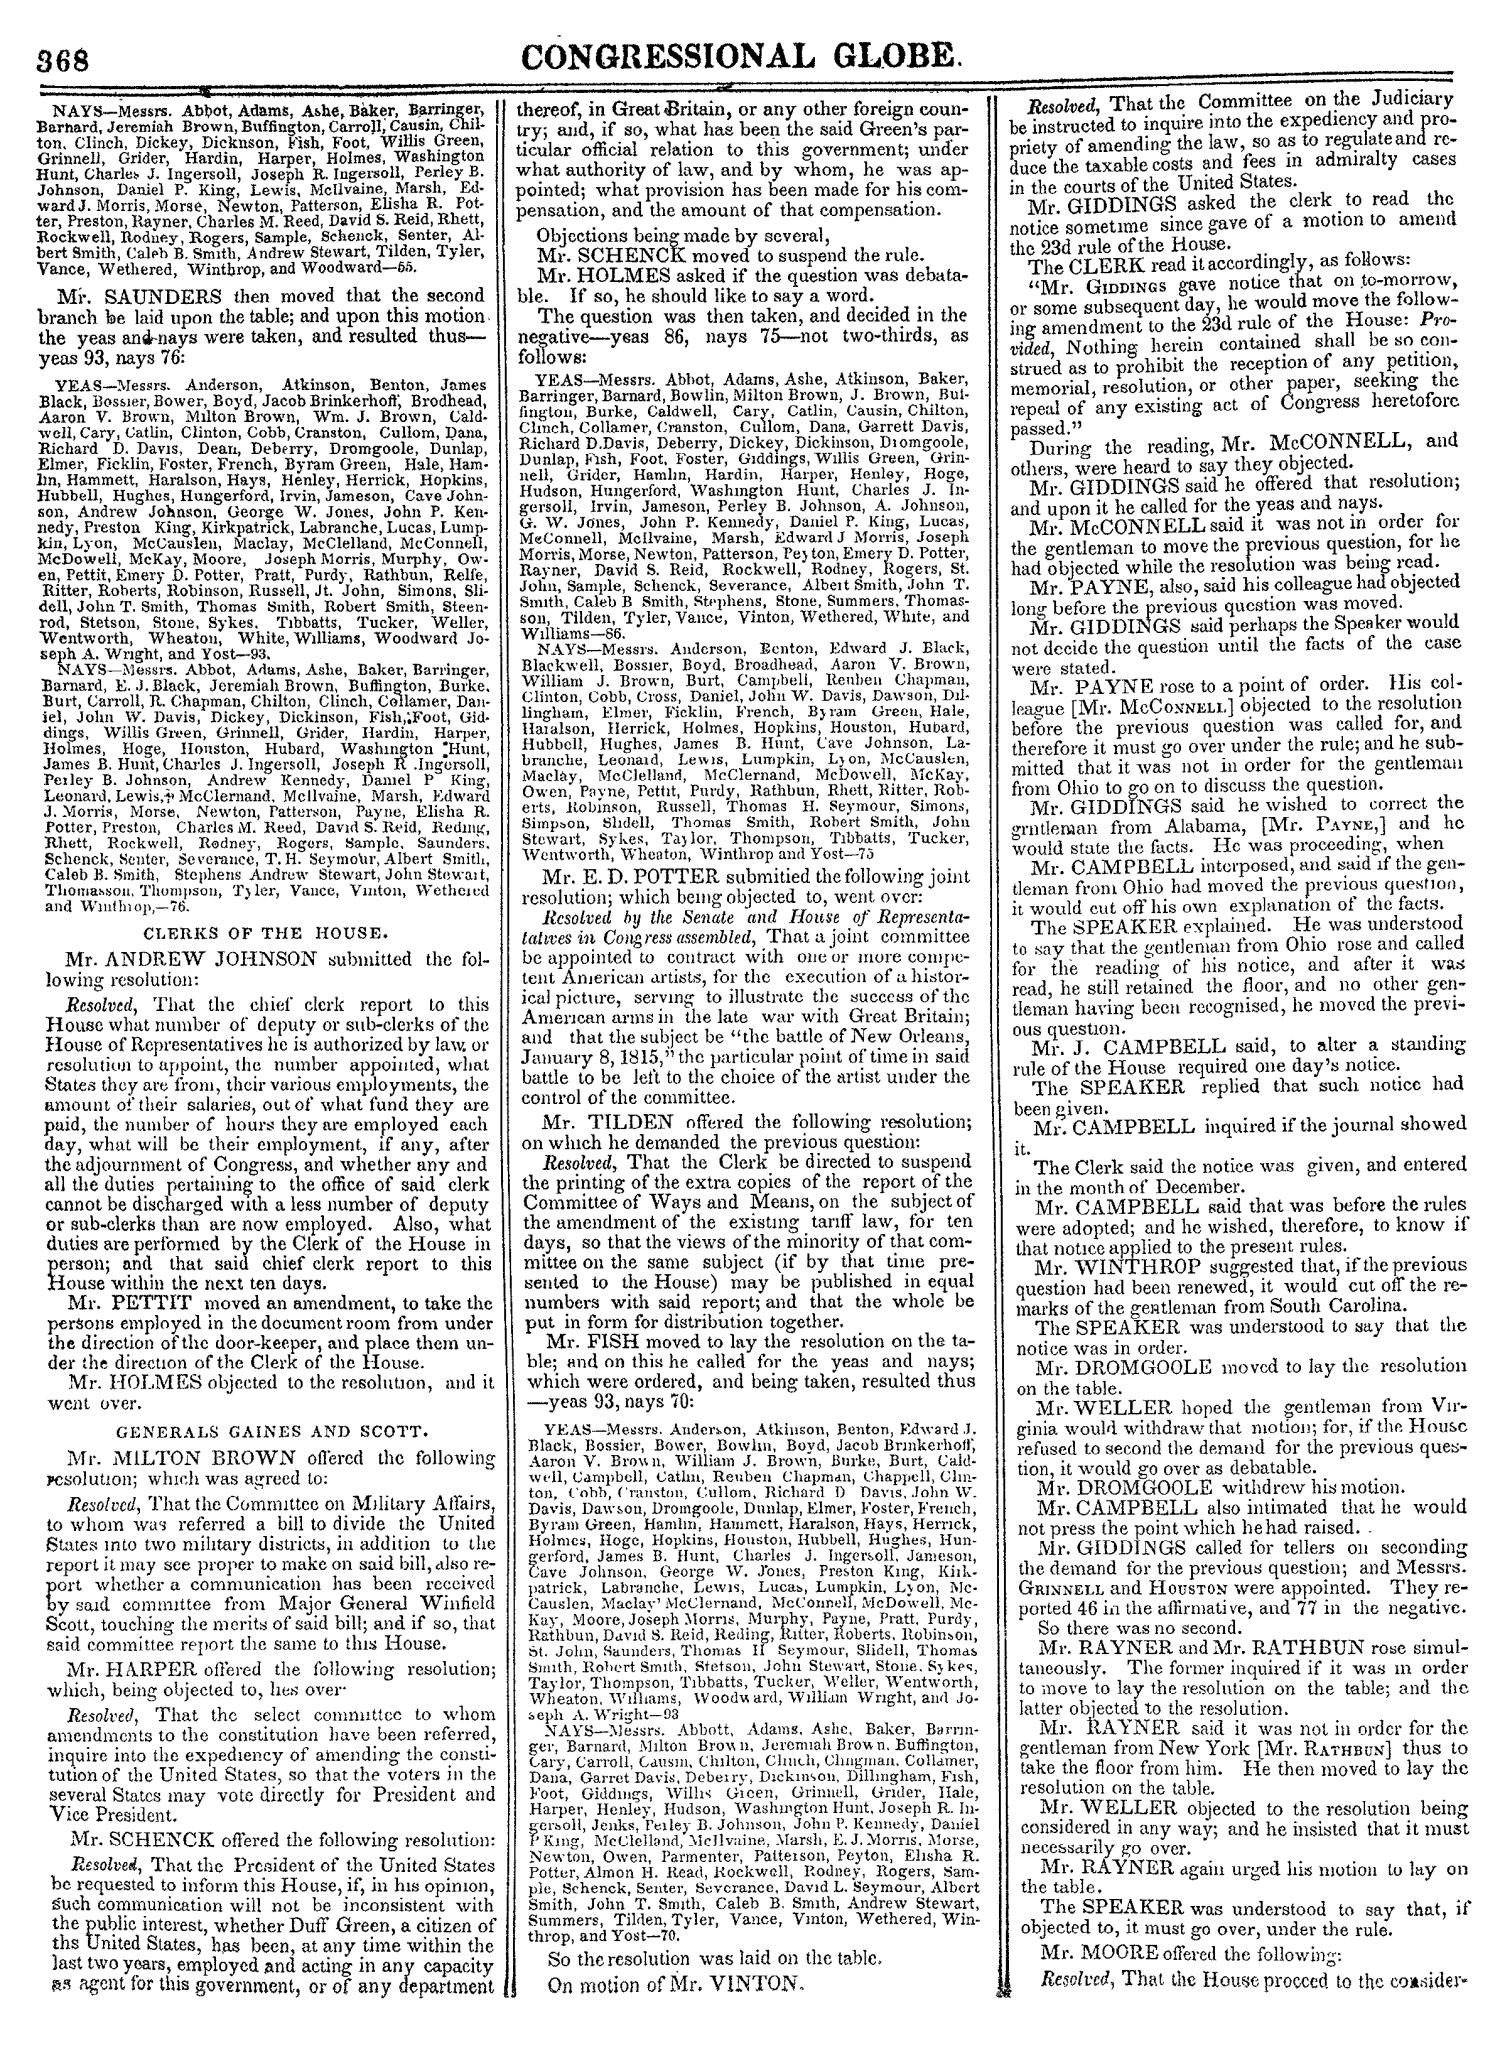 The Congressional Globe, Volume 13, Part 1: Twenty-Eighth Congress, First Session
                                                
                                                    368
                                                